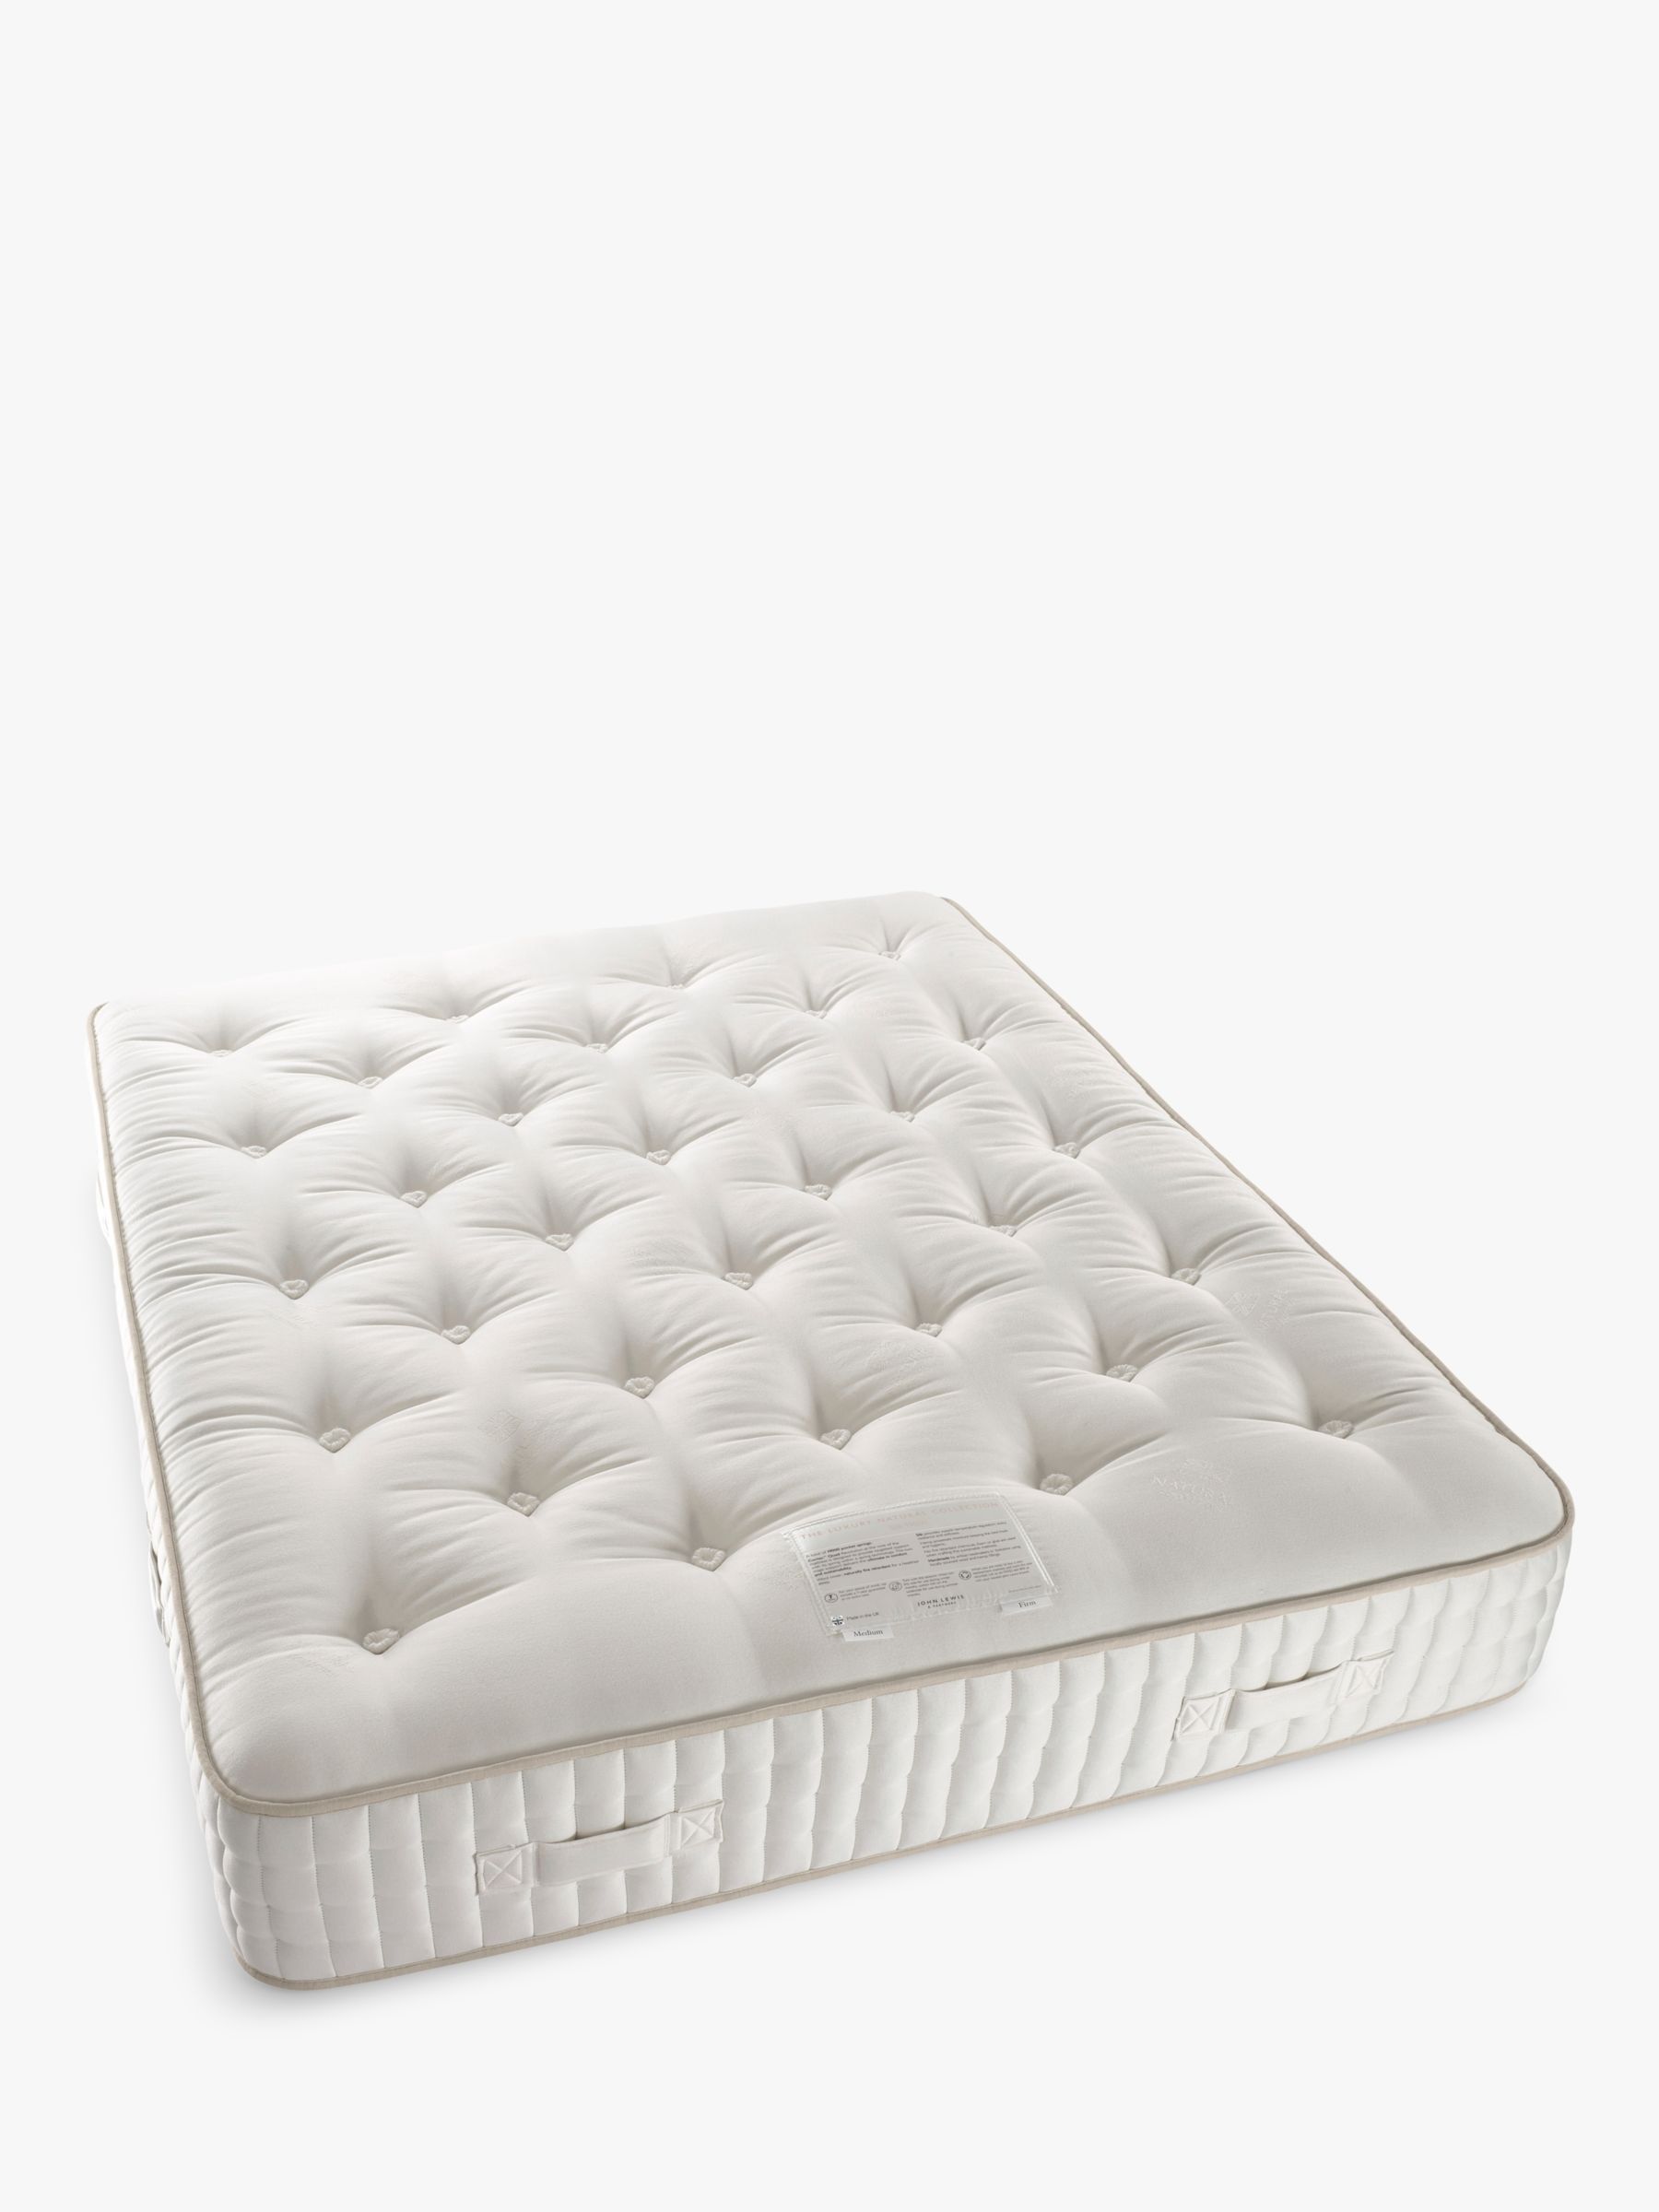 Photo of John lewis luxury natural collection silk 19000 small double firmer tension pocket spring mattress